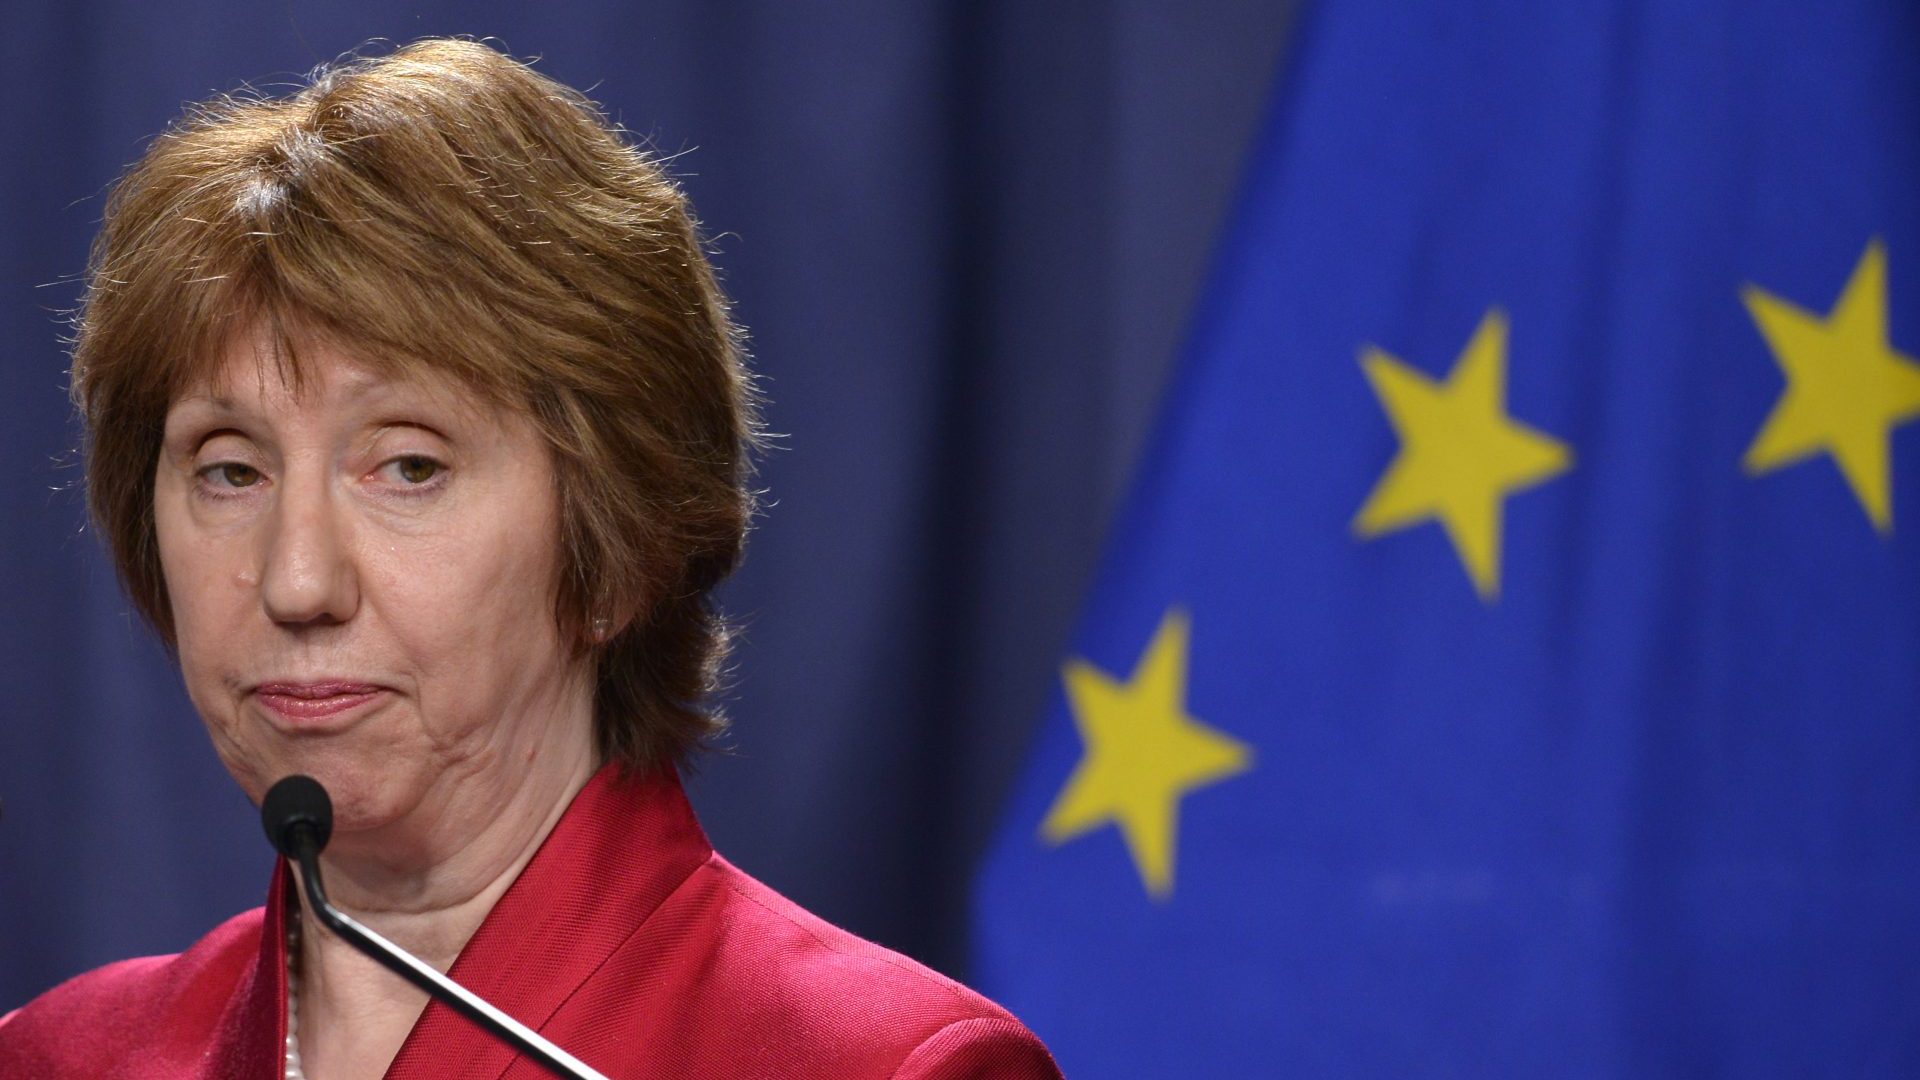 Former EU Policy Chief Catherine Ashton speaks during a press conference at the Intercontinental hotel in 2014 in Geneva, Switzerland. Photo: Harold Cunningham/Getty Images